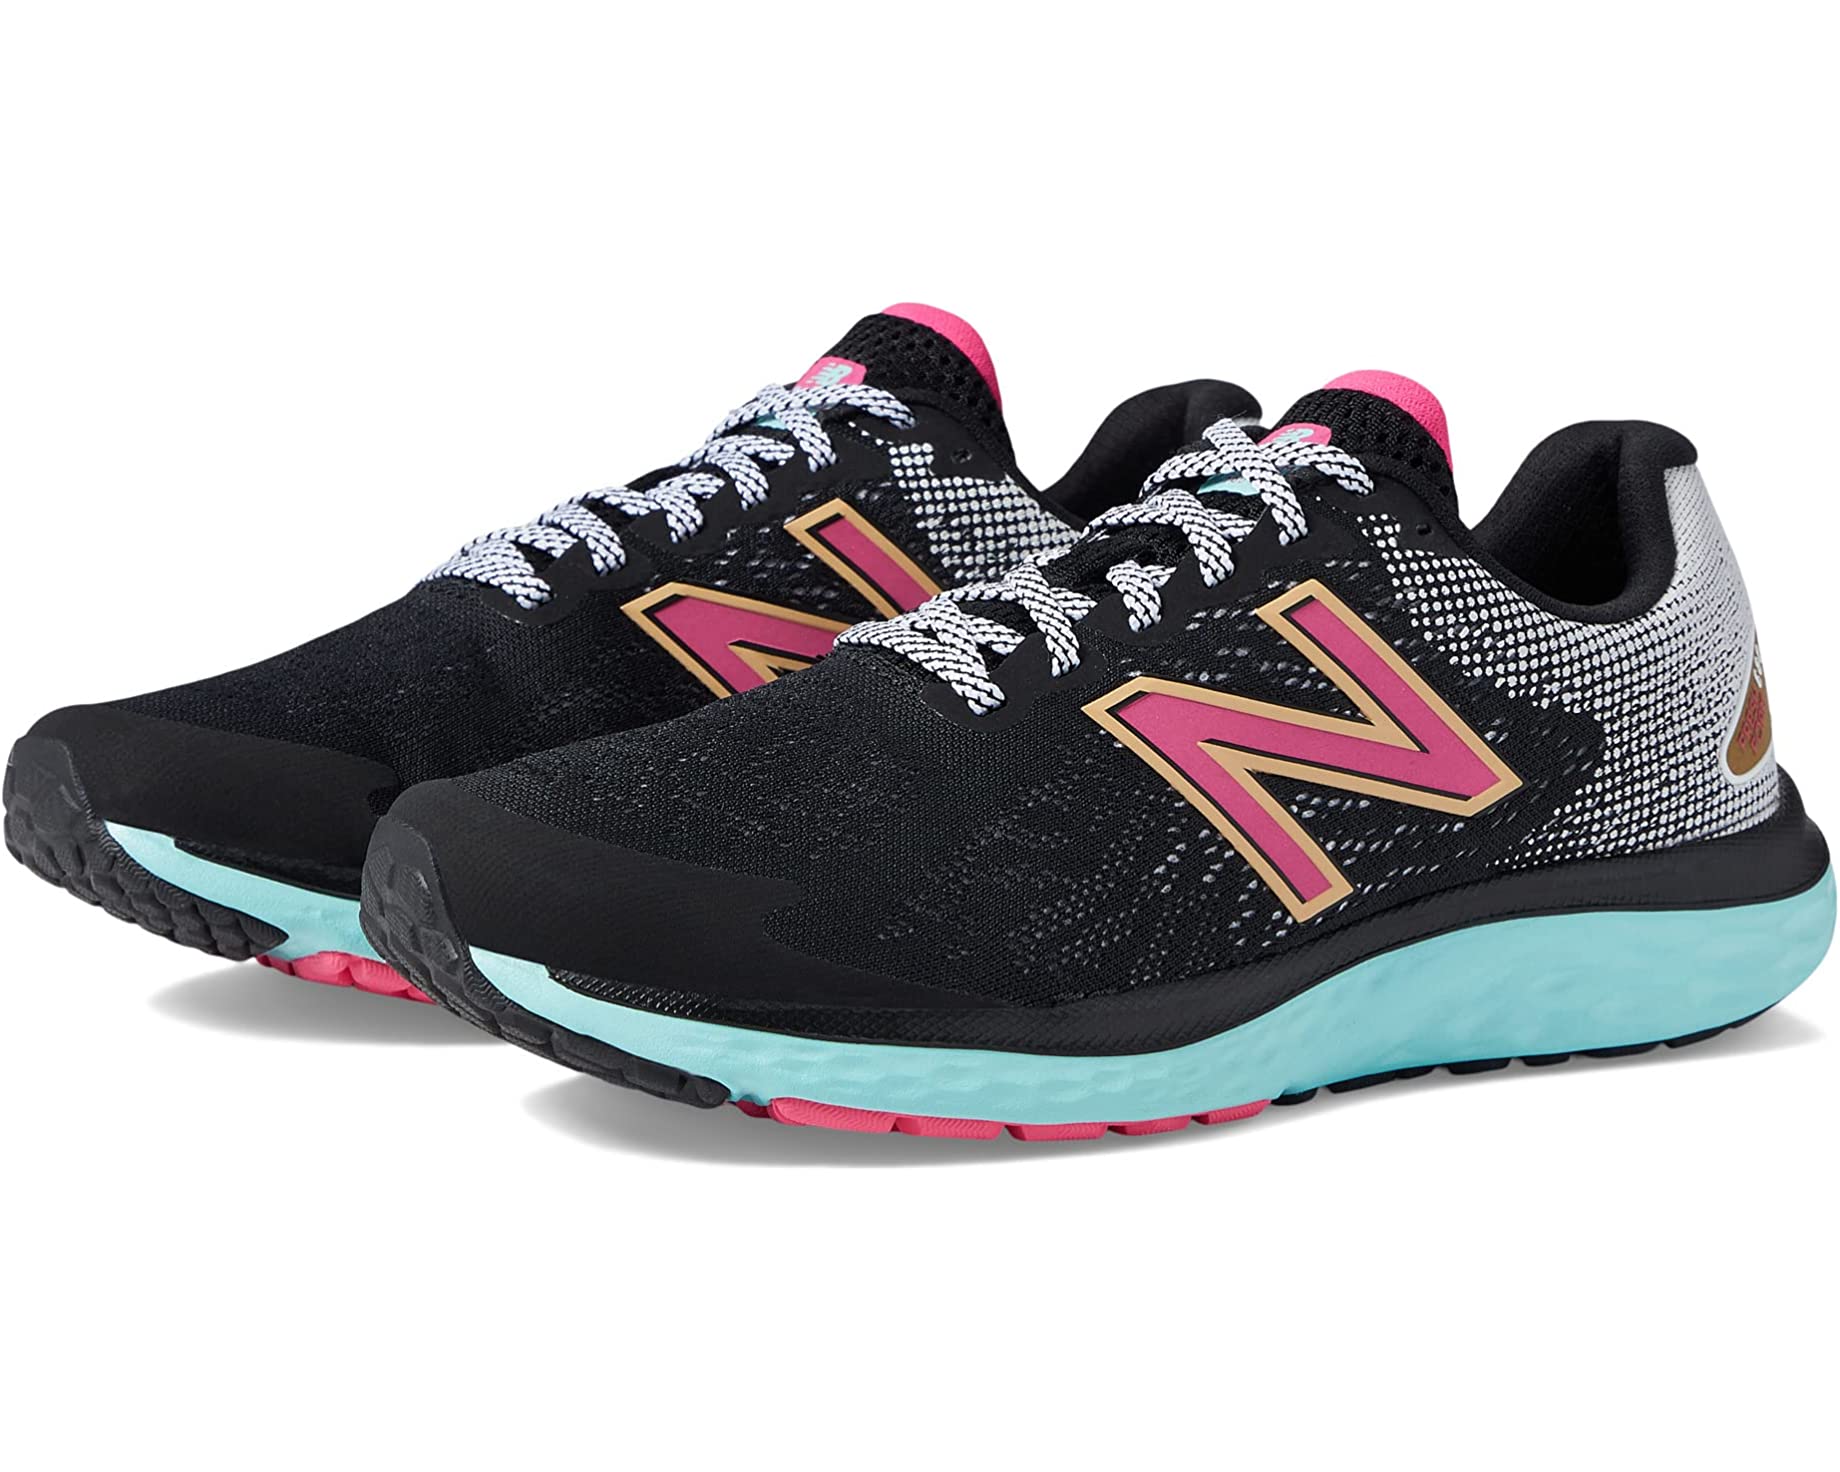 A pair of black New Balance sneakers with pink and teal accents.